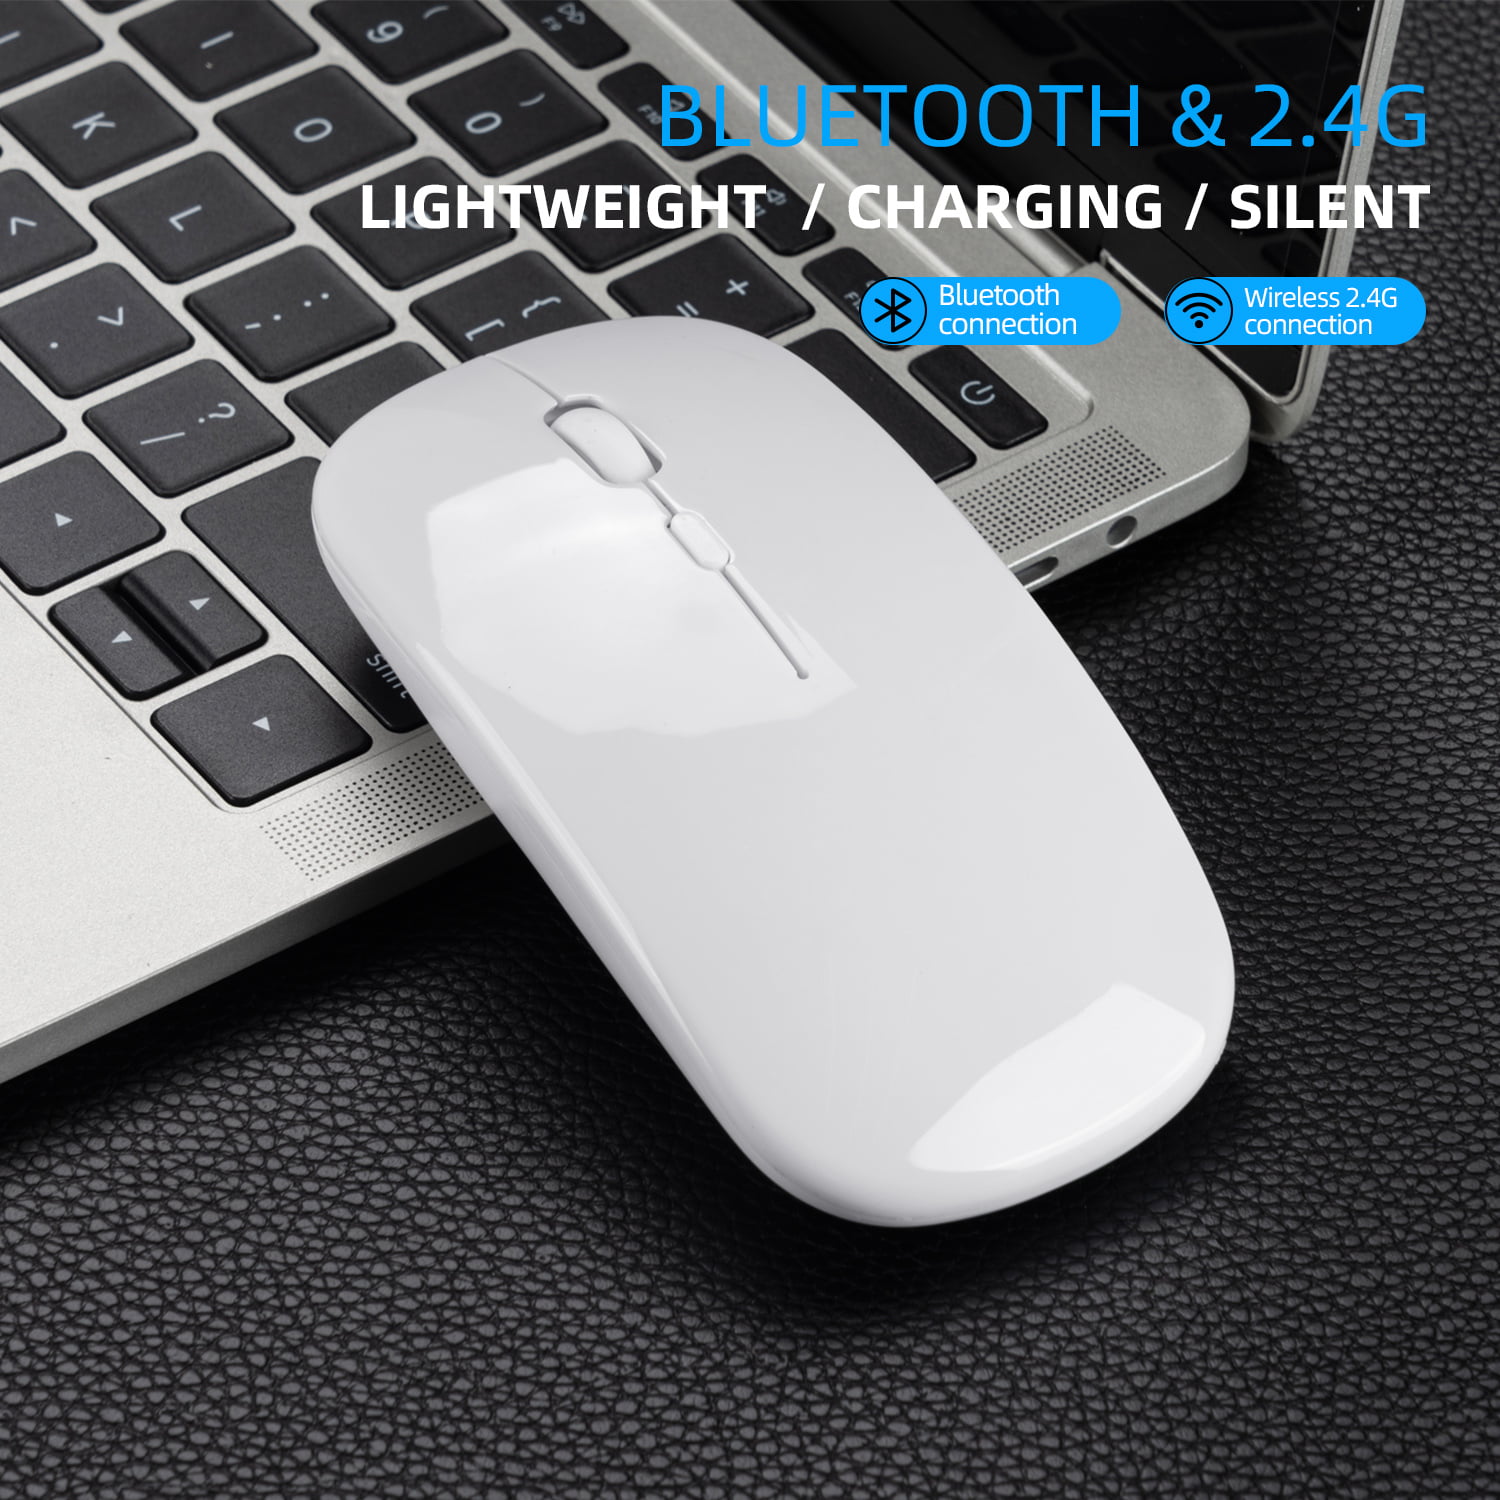 2.4G Wireless Mute Computer Mouse for PC Laptop Silver RONSHIN Dual Mode Bluetooth 4.0 